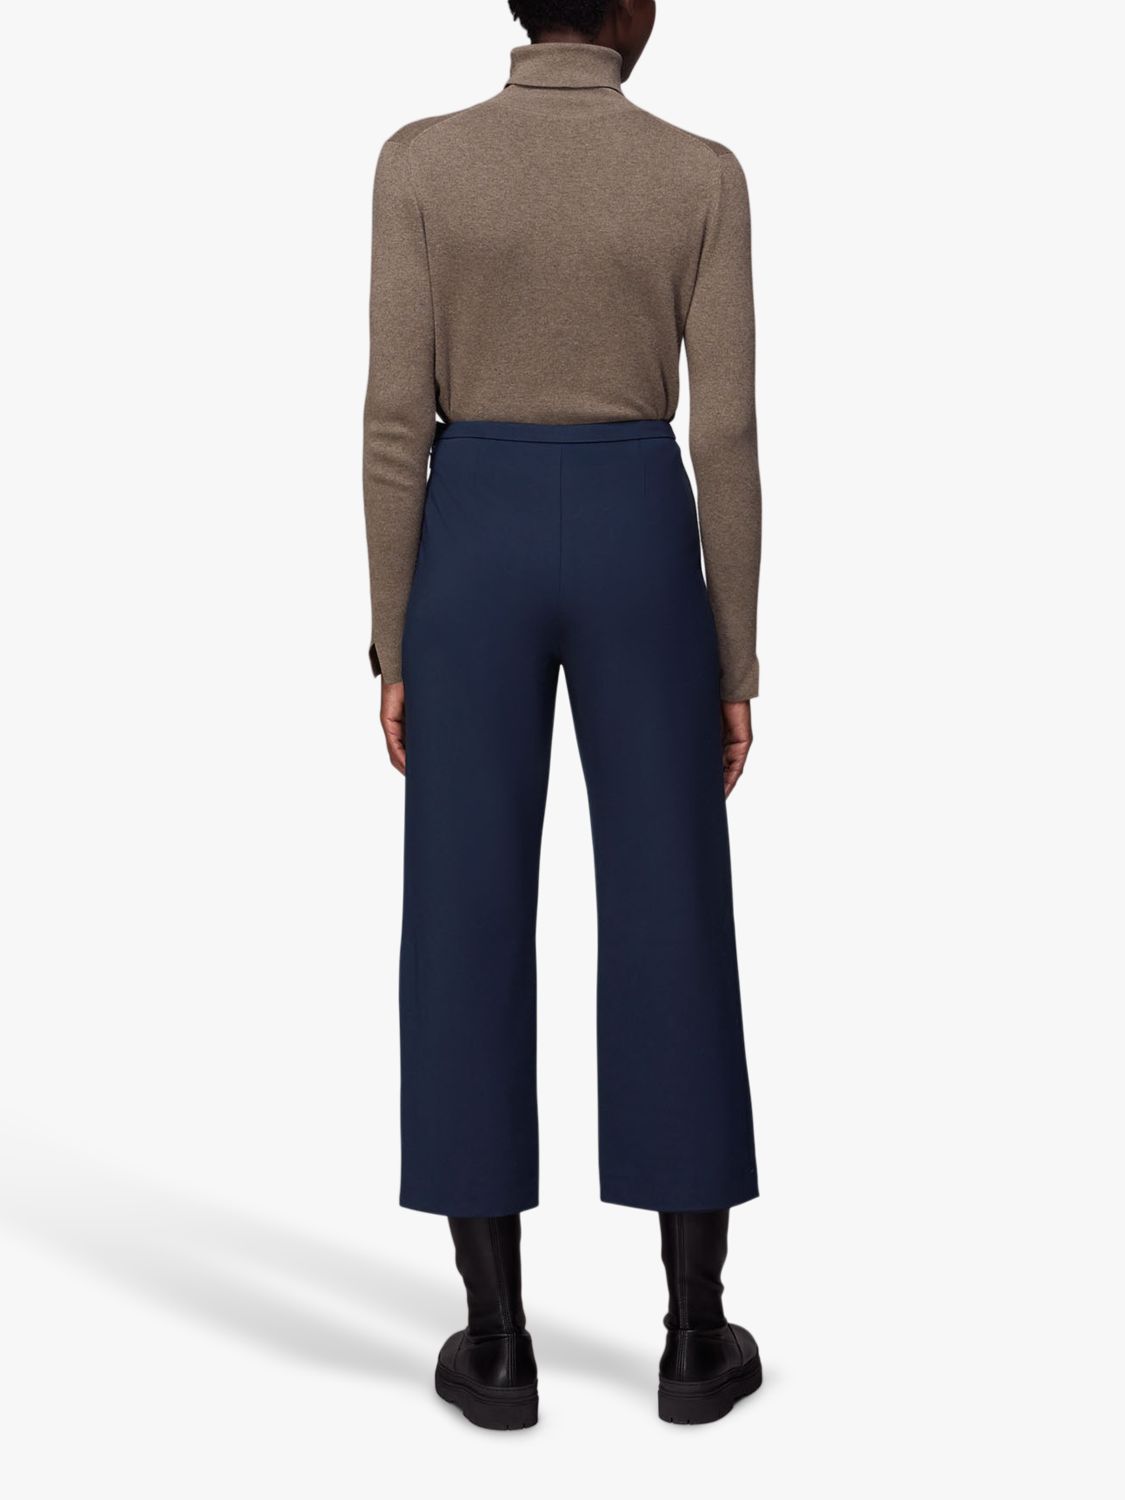 Whistles Camilla Wide Leg Trousers, Navy at John Lewis & Partners